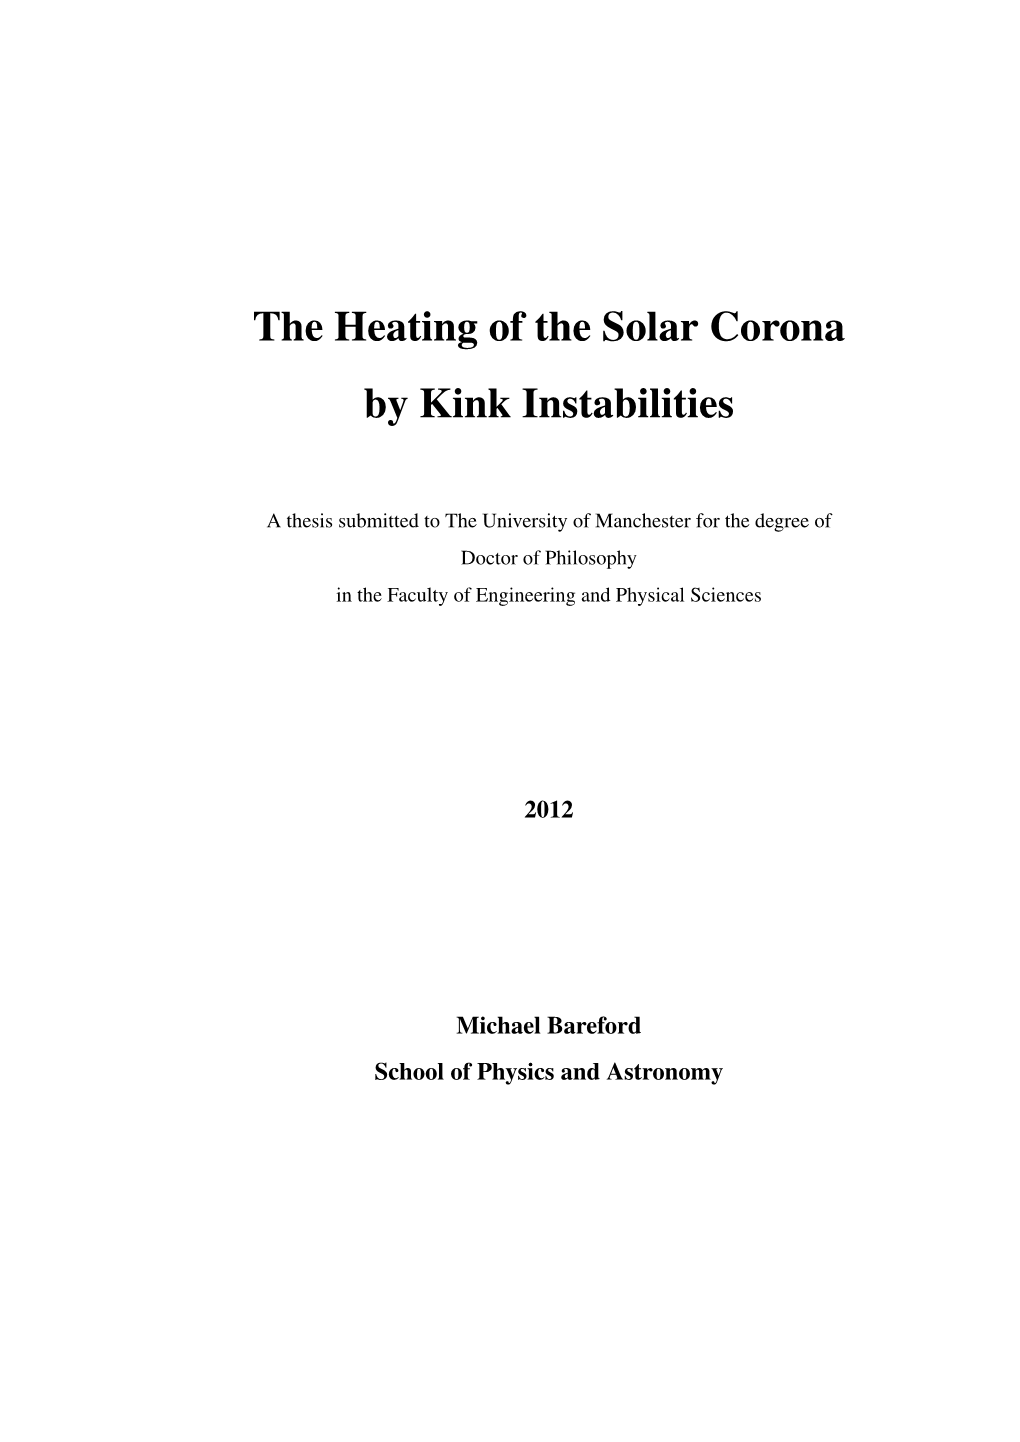 The Heating of the Solar Corona by Kink Instabilities